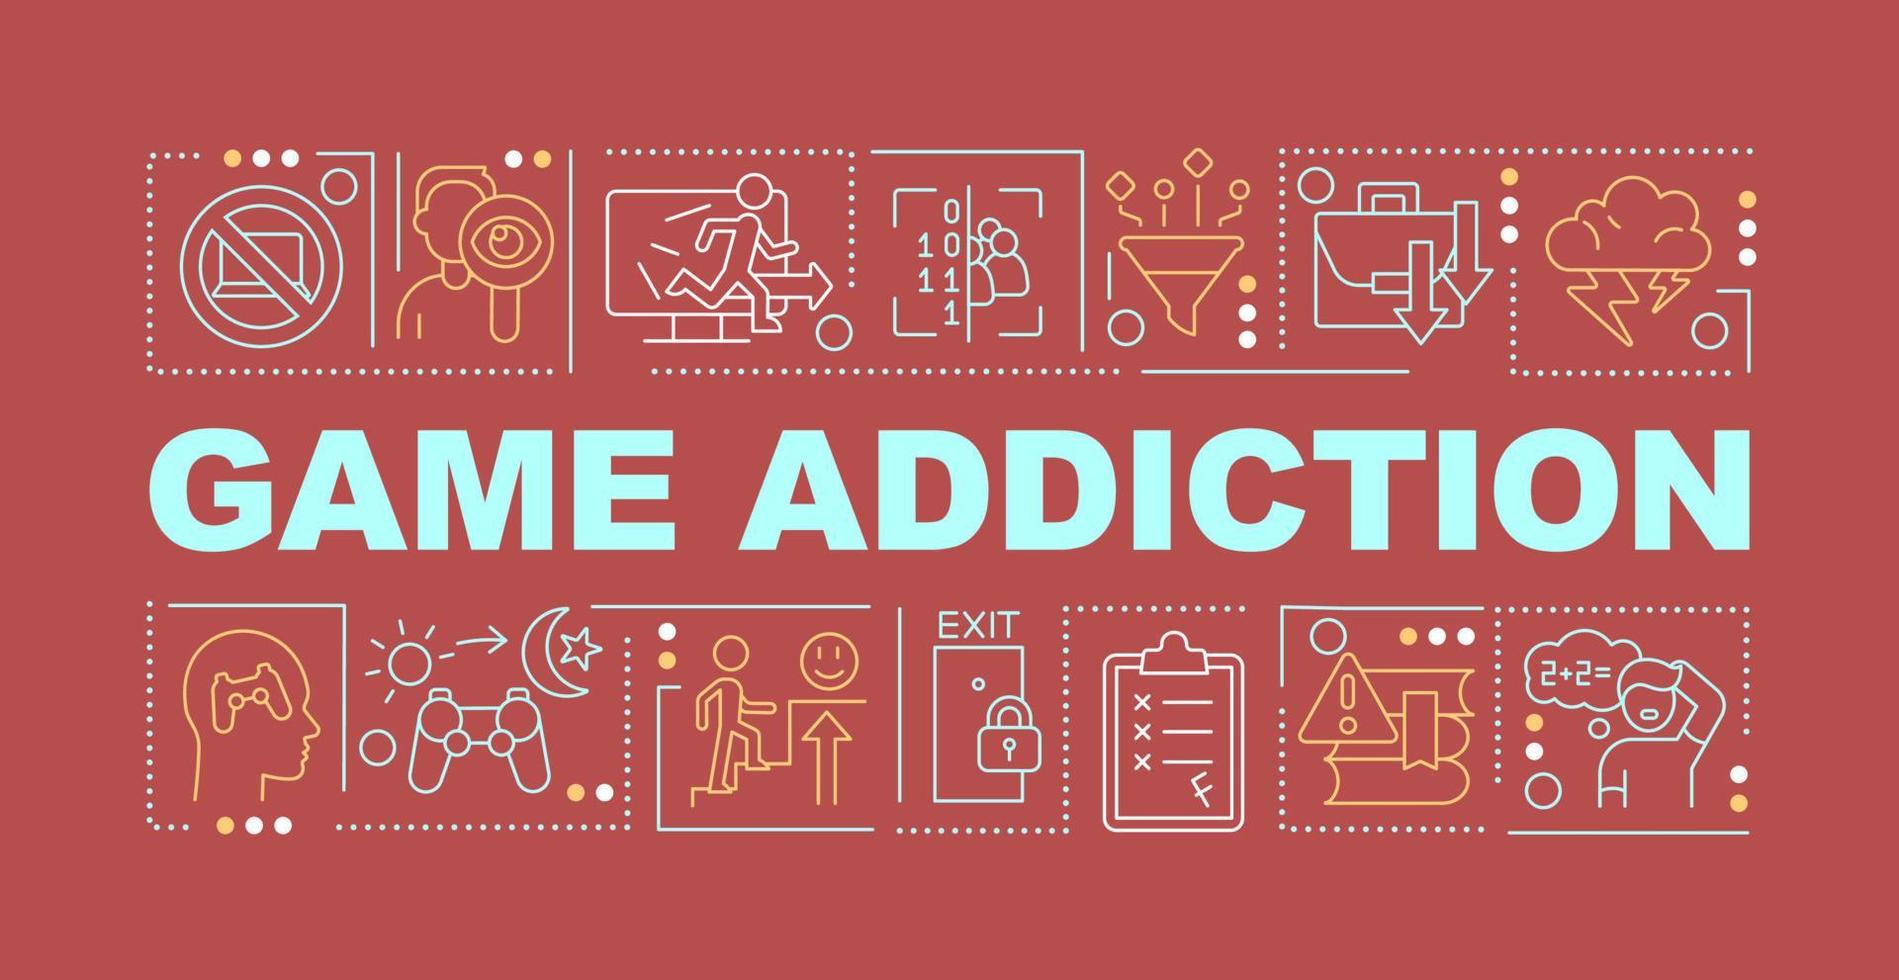 Game addiction word concepts red banner. Emotional obsession problem. Infographics with icons on color background. Isolated typography. Vector illustration with text.